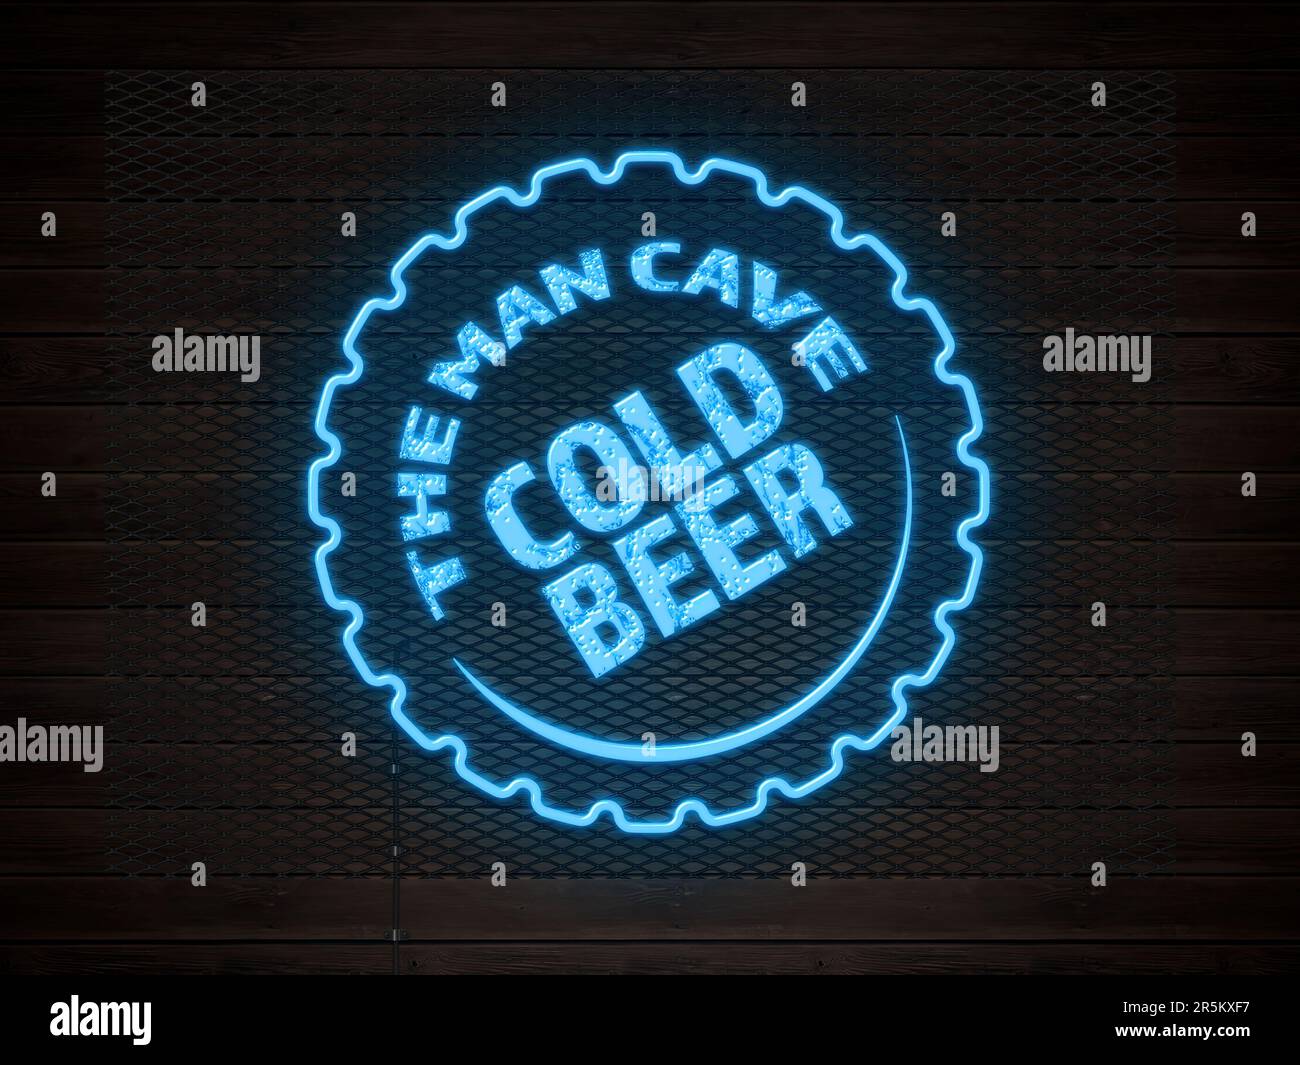 Man Cave Cold Beer Neon Sign Illustration Stock Photo